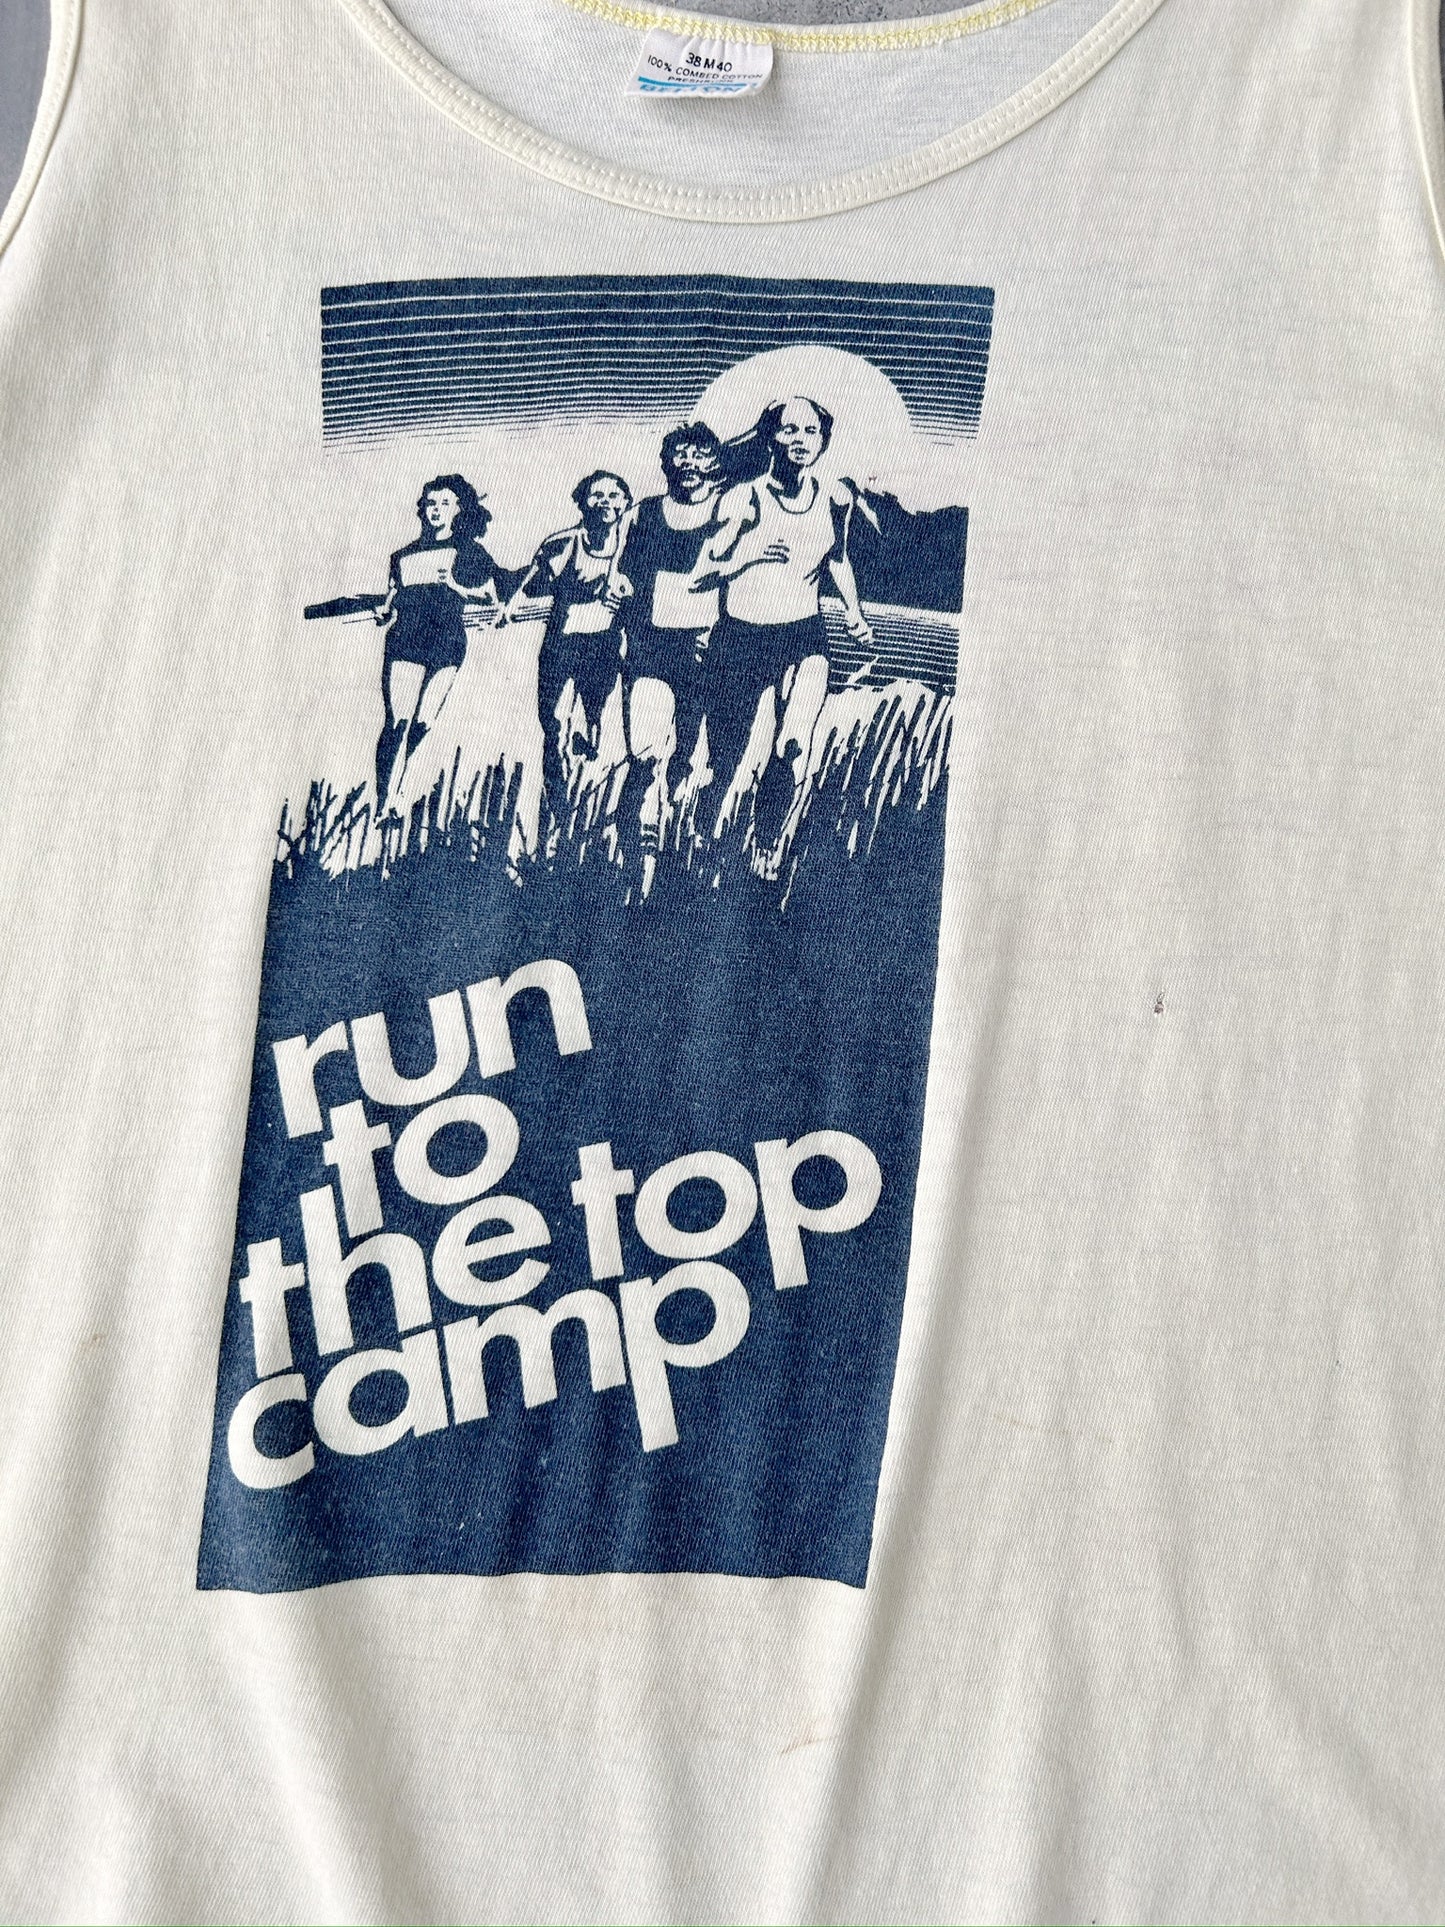 Running Camp Tank Top 80's - Small